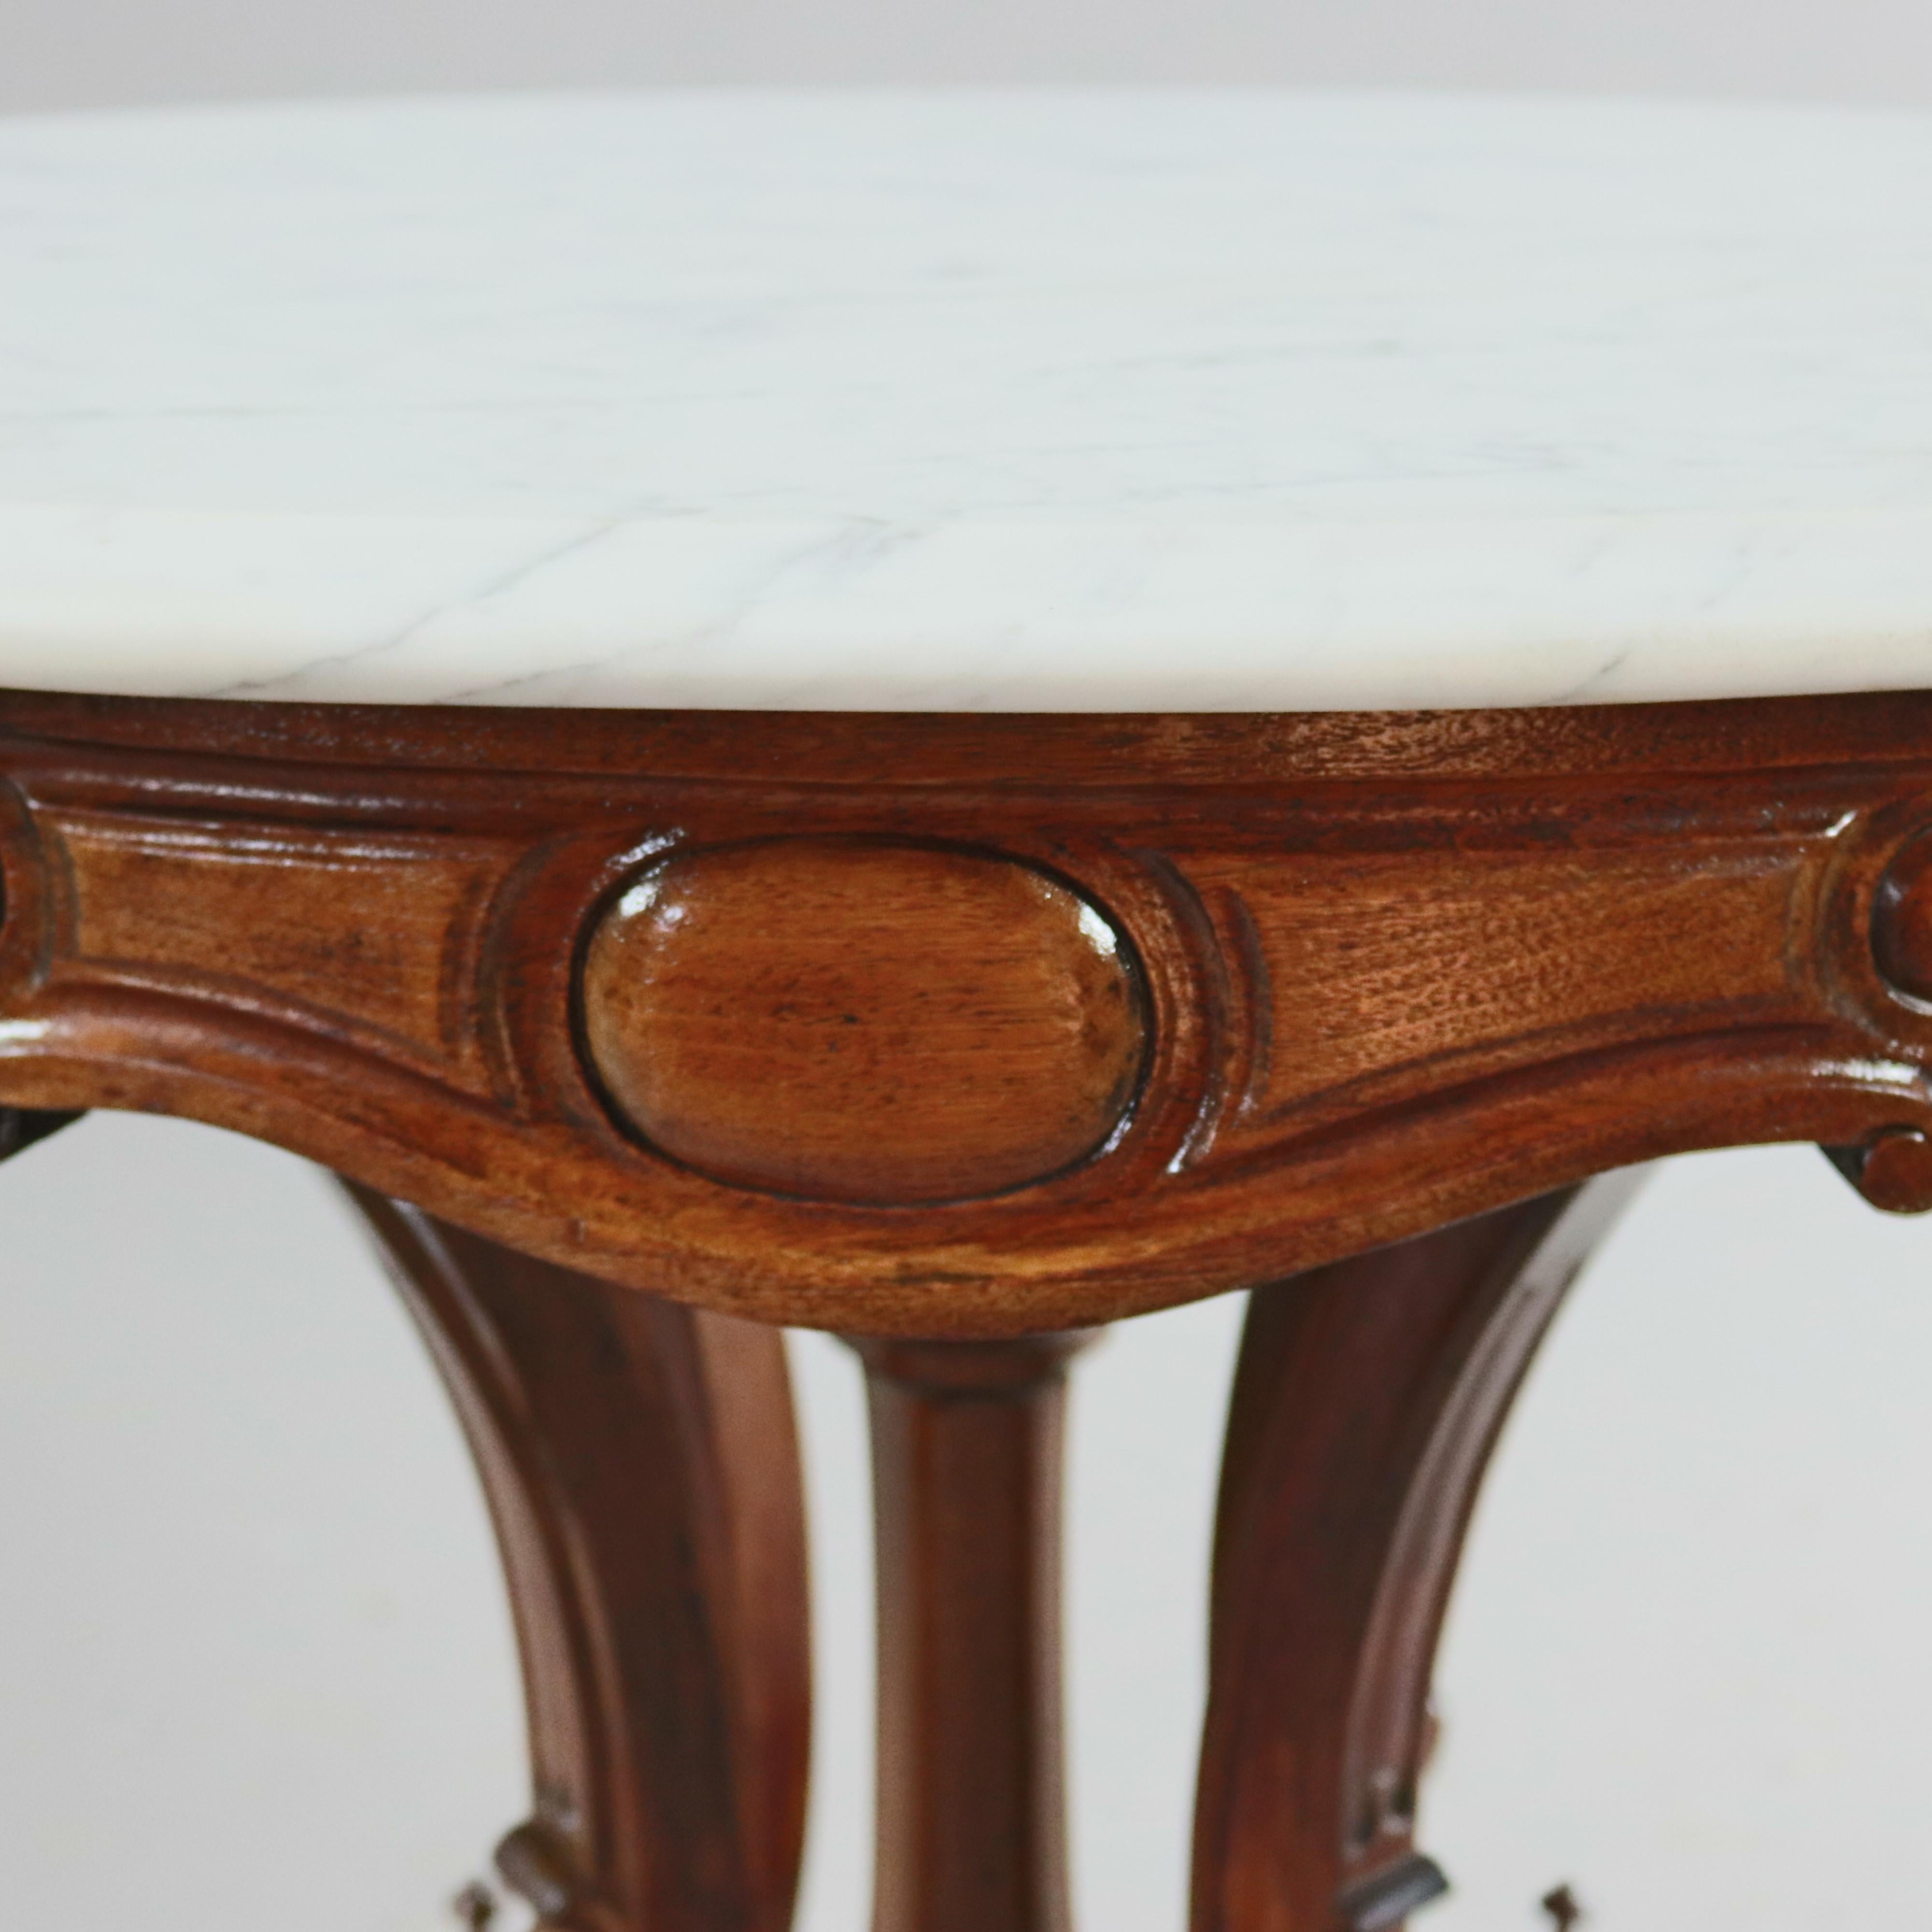 American Antique Renaissance Revival Carved Walnut & Marble Center Table, circa 1880 